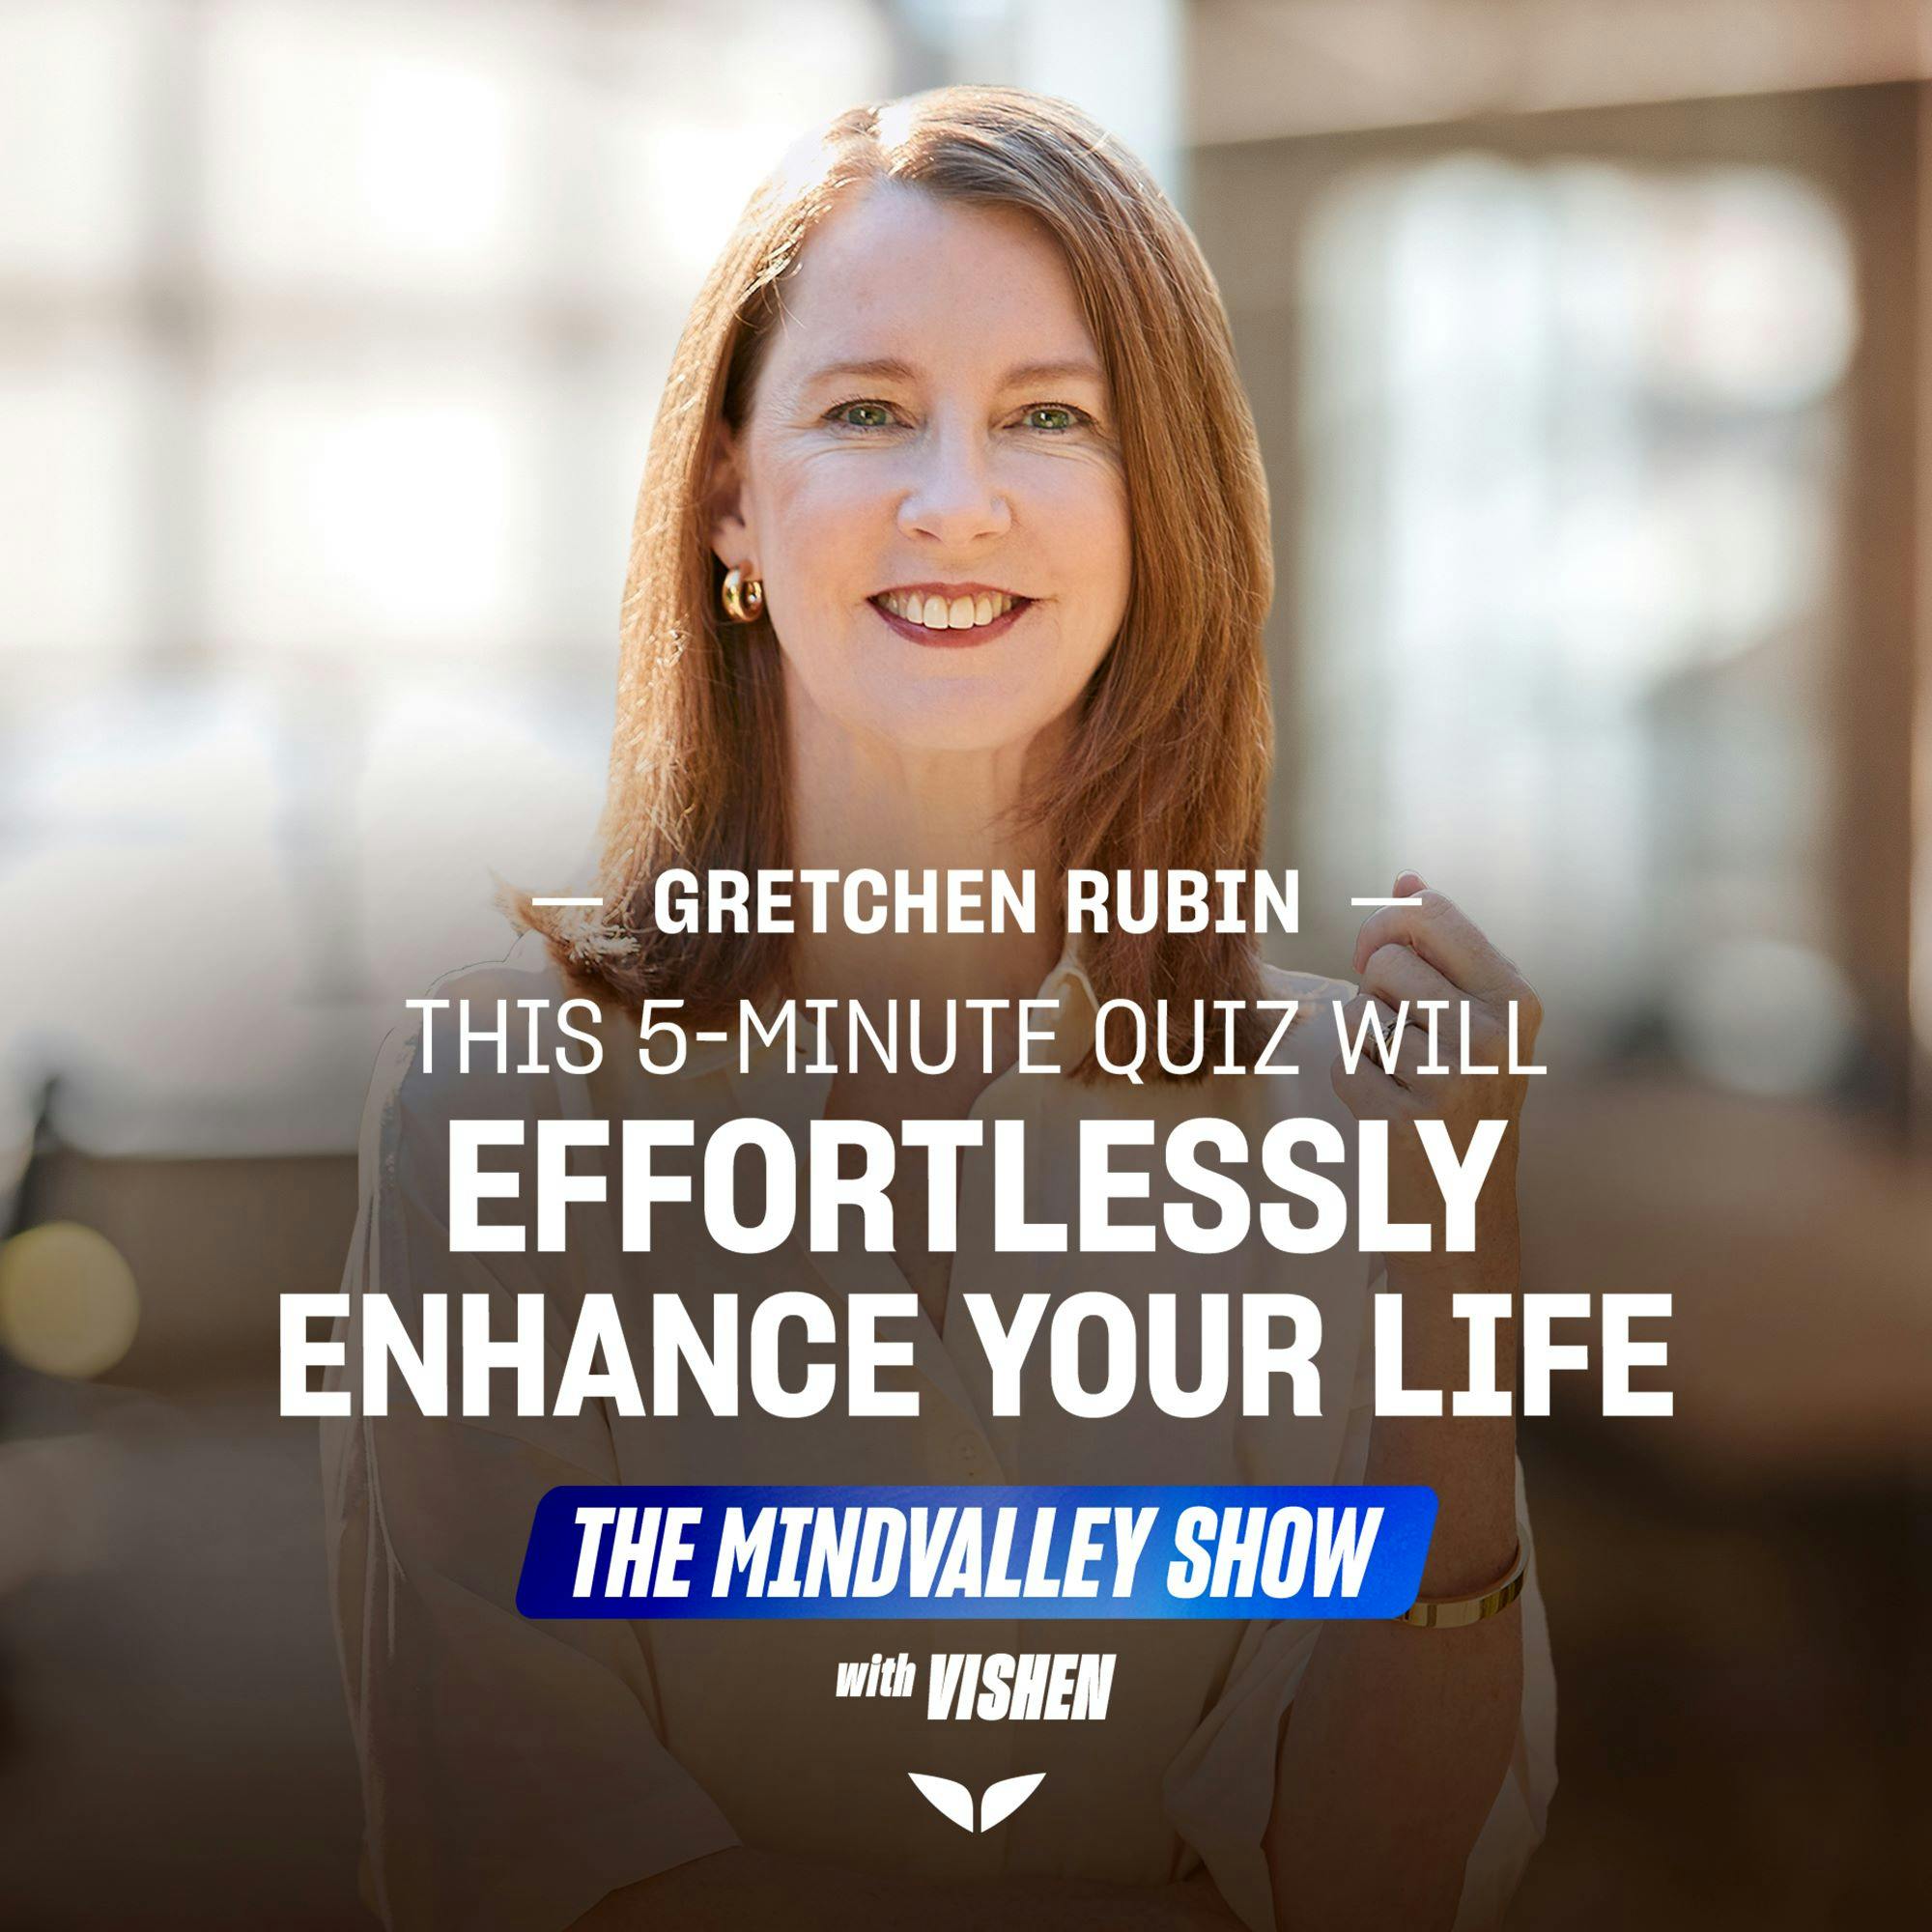 How Gretchen Rubin's Famous 5-Minute Quiz Will Effortlessly Enhance Your Life